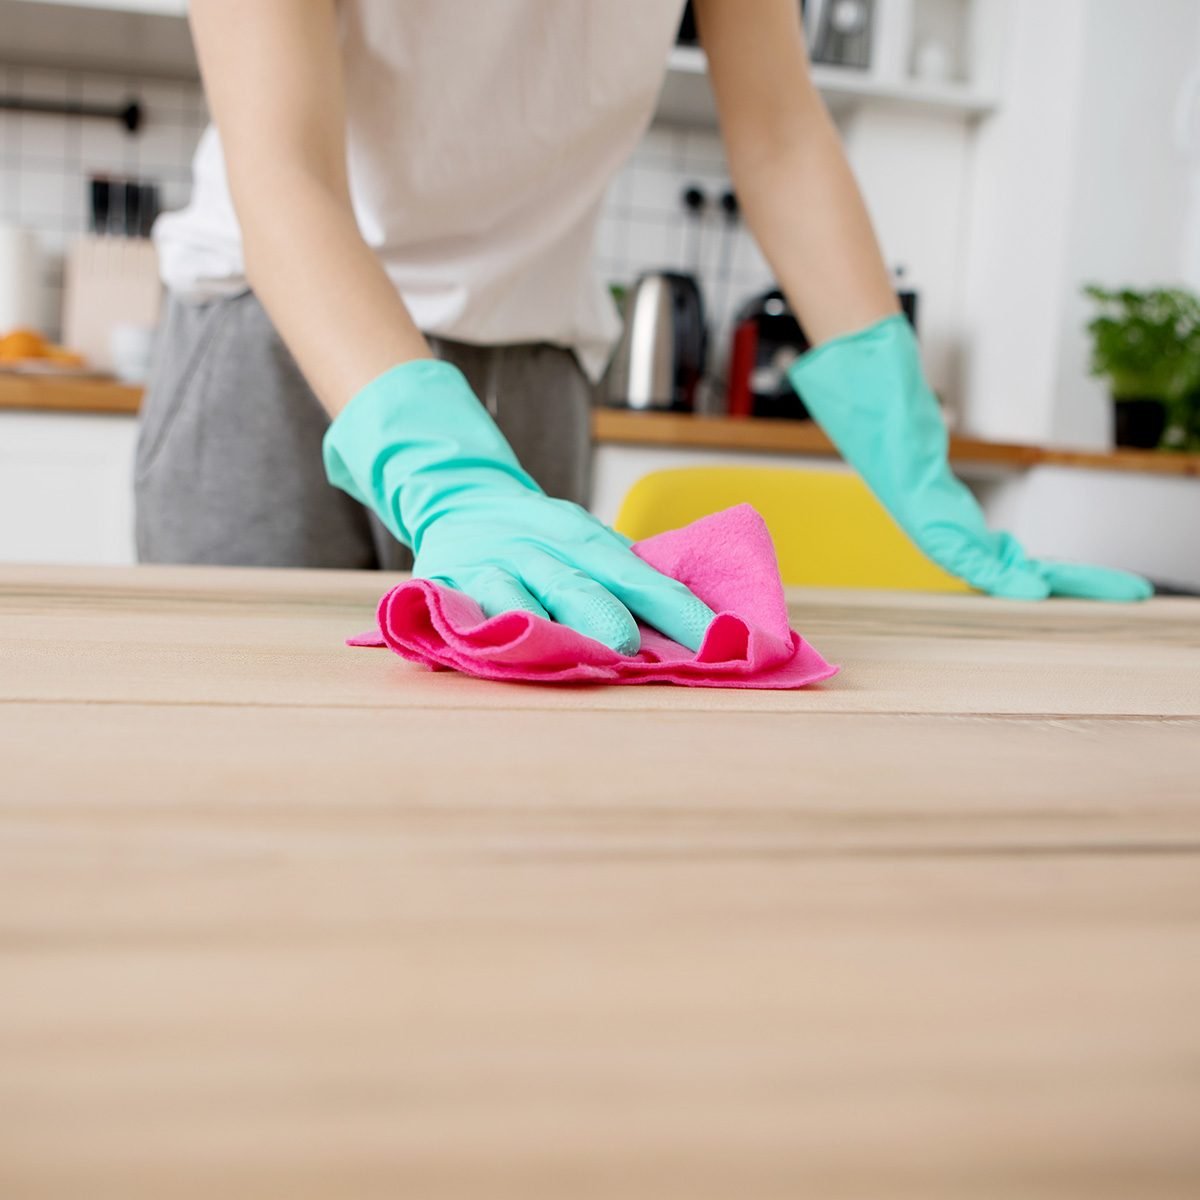 https://www.tasteofhome.com/wp-content/uploads/2020/09/midsection-of-woman-cleaning-1140943530.jpg